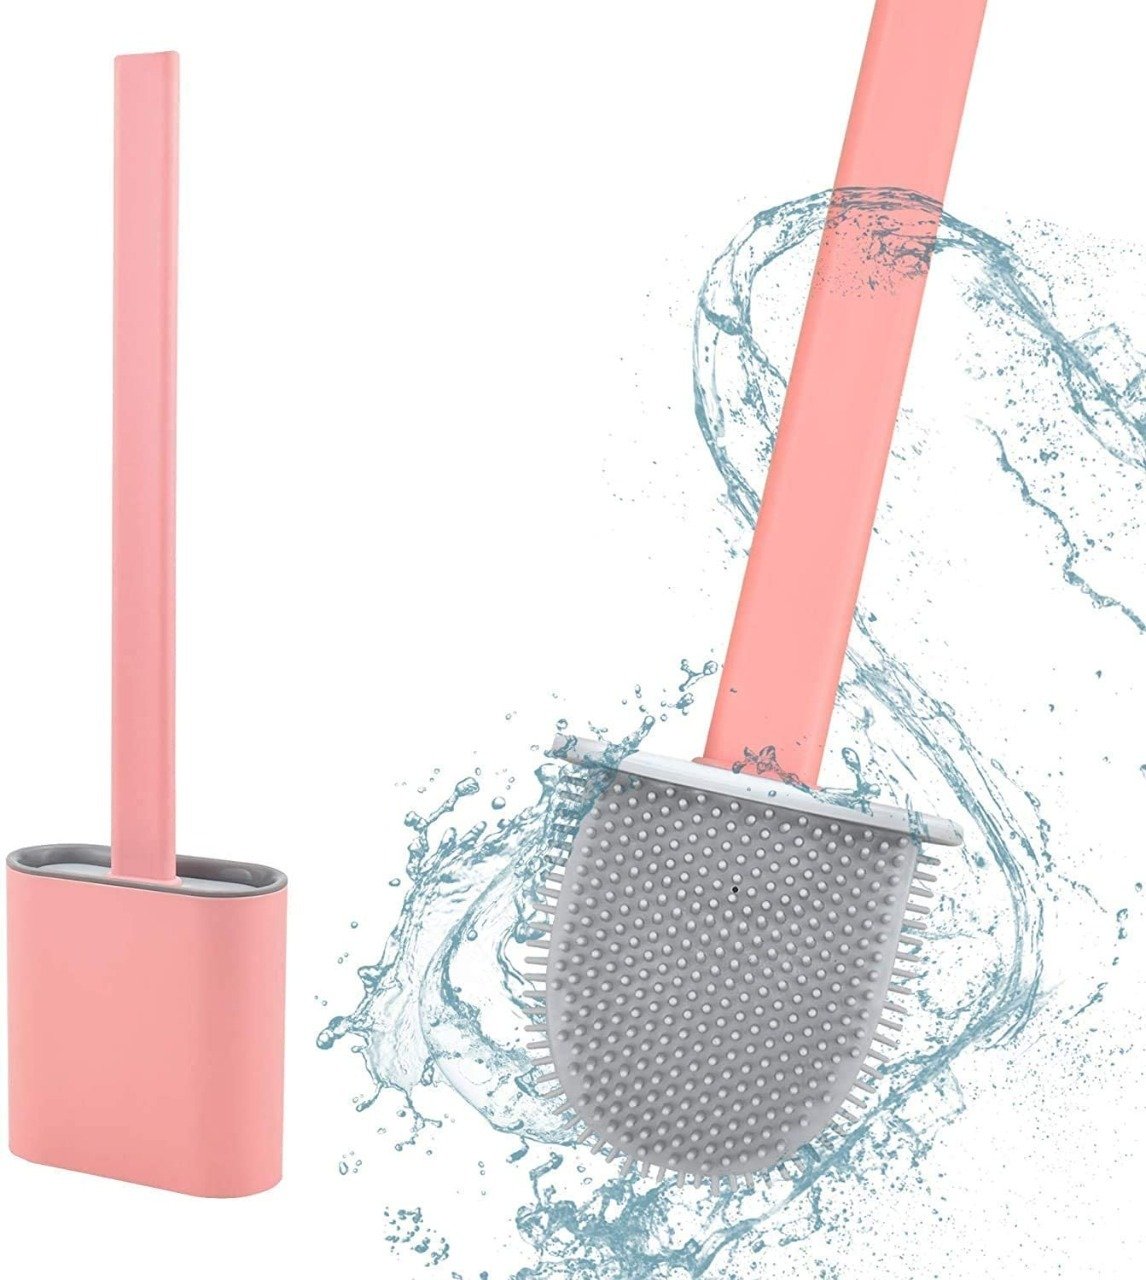 silicon toilet brush with slim holder stand flat head with flexible soft bristles